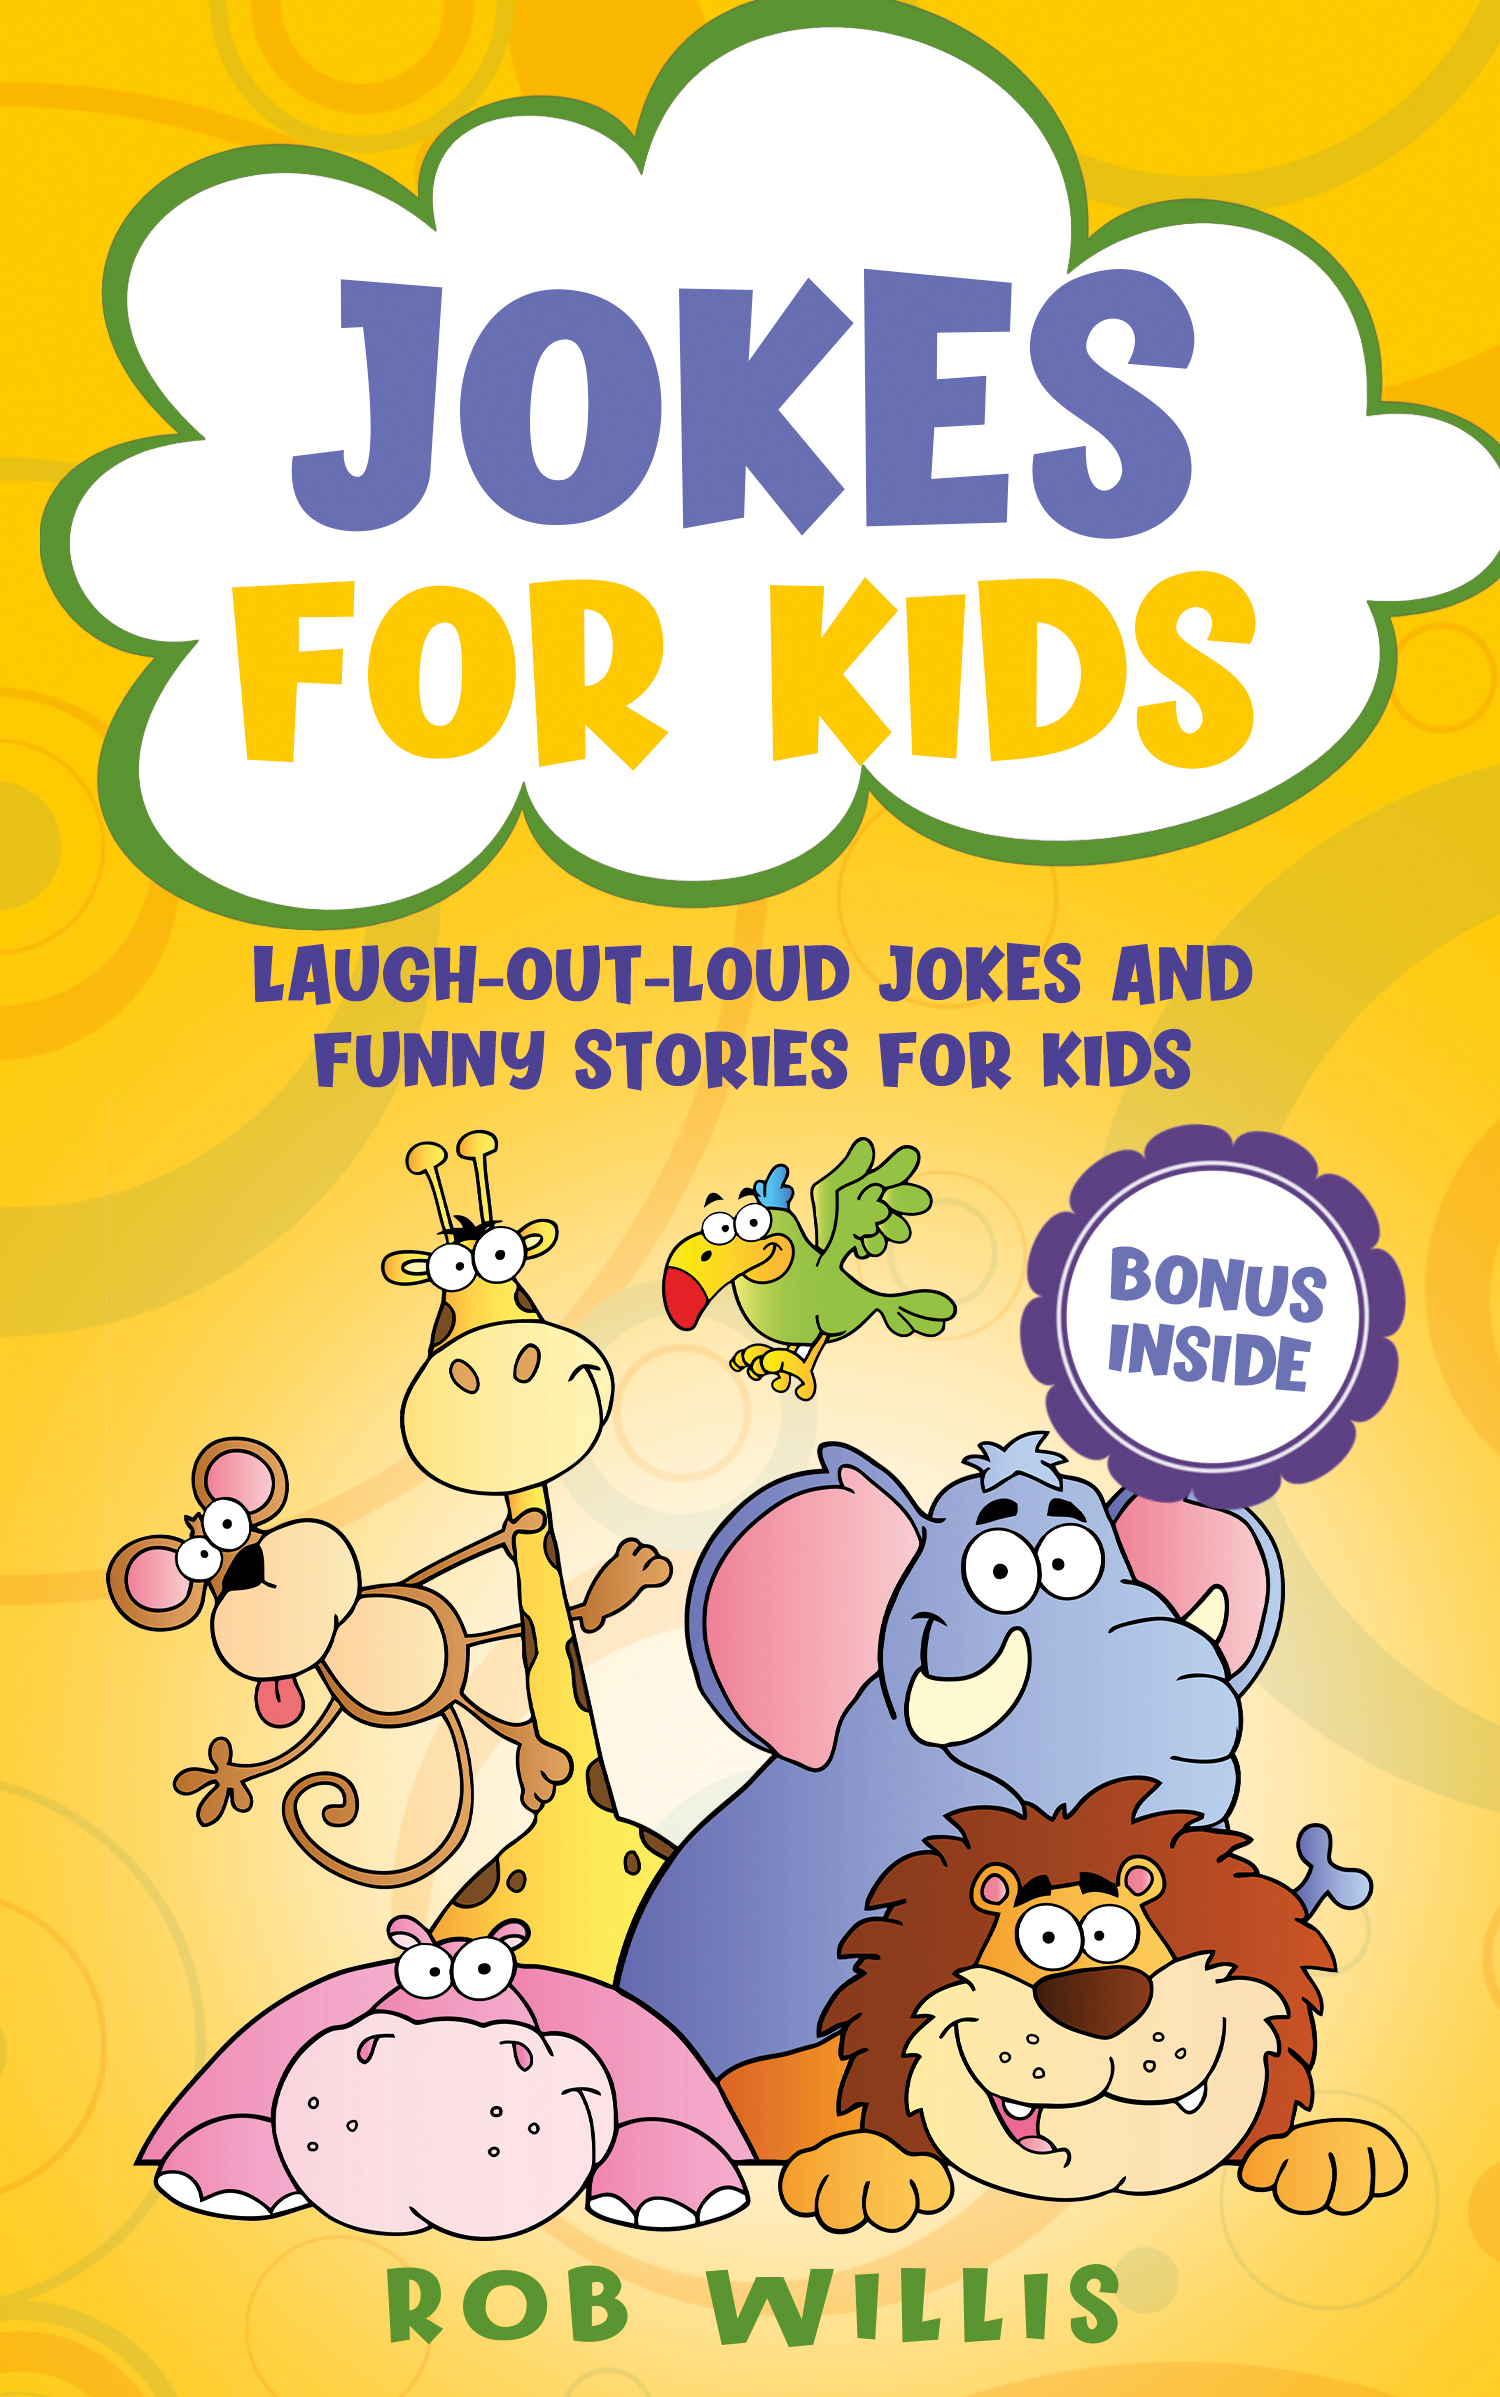 FREE: Jokes for Kids: Laugh-out-loud jokes and funny stories for kids by Rob Willis